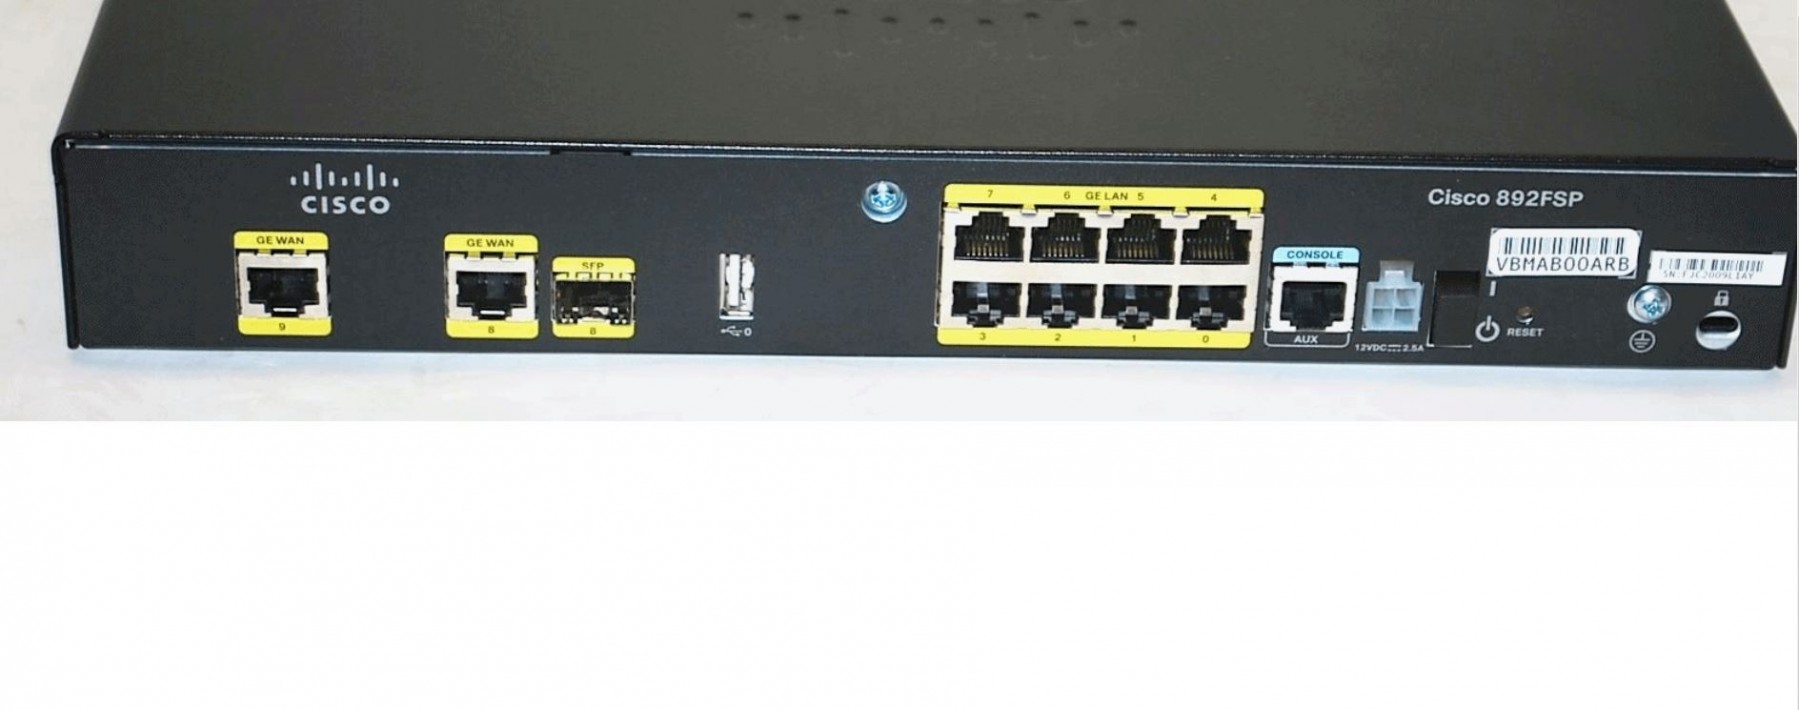 890 Ethernet Sec. Router - NETWORKING